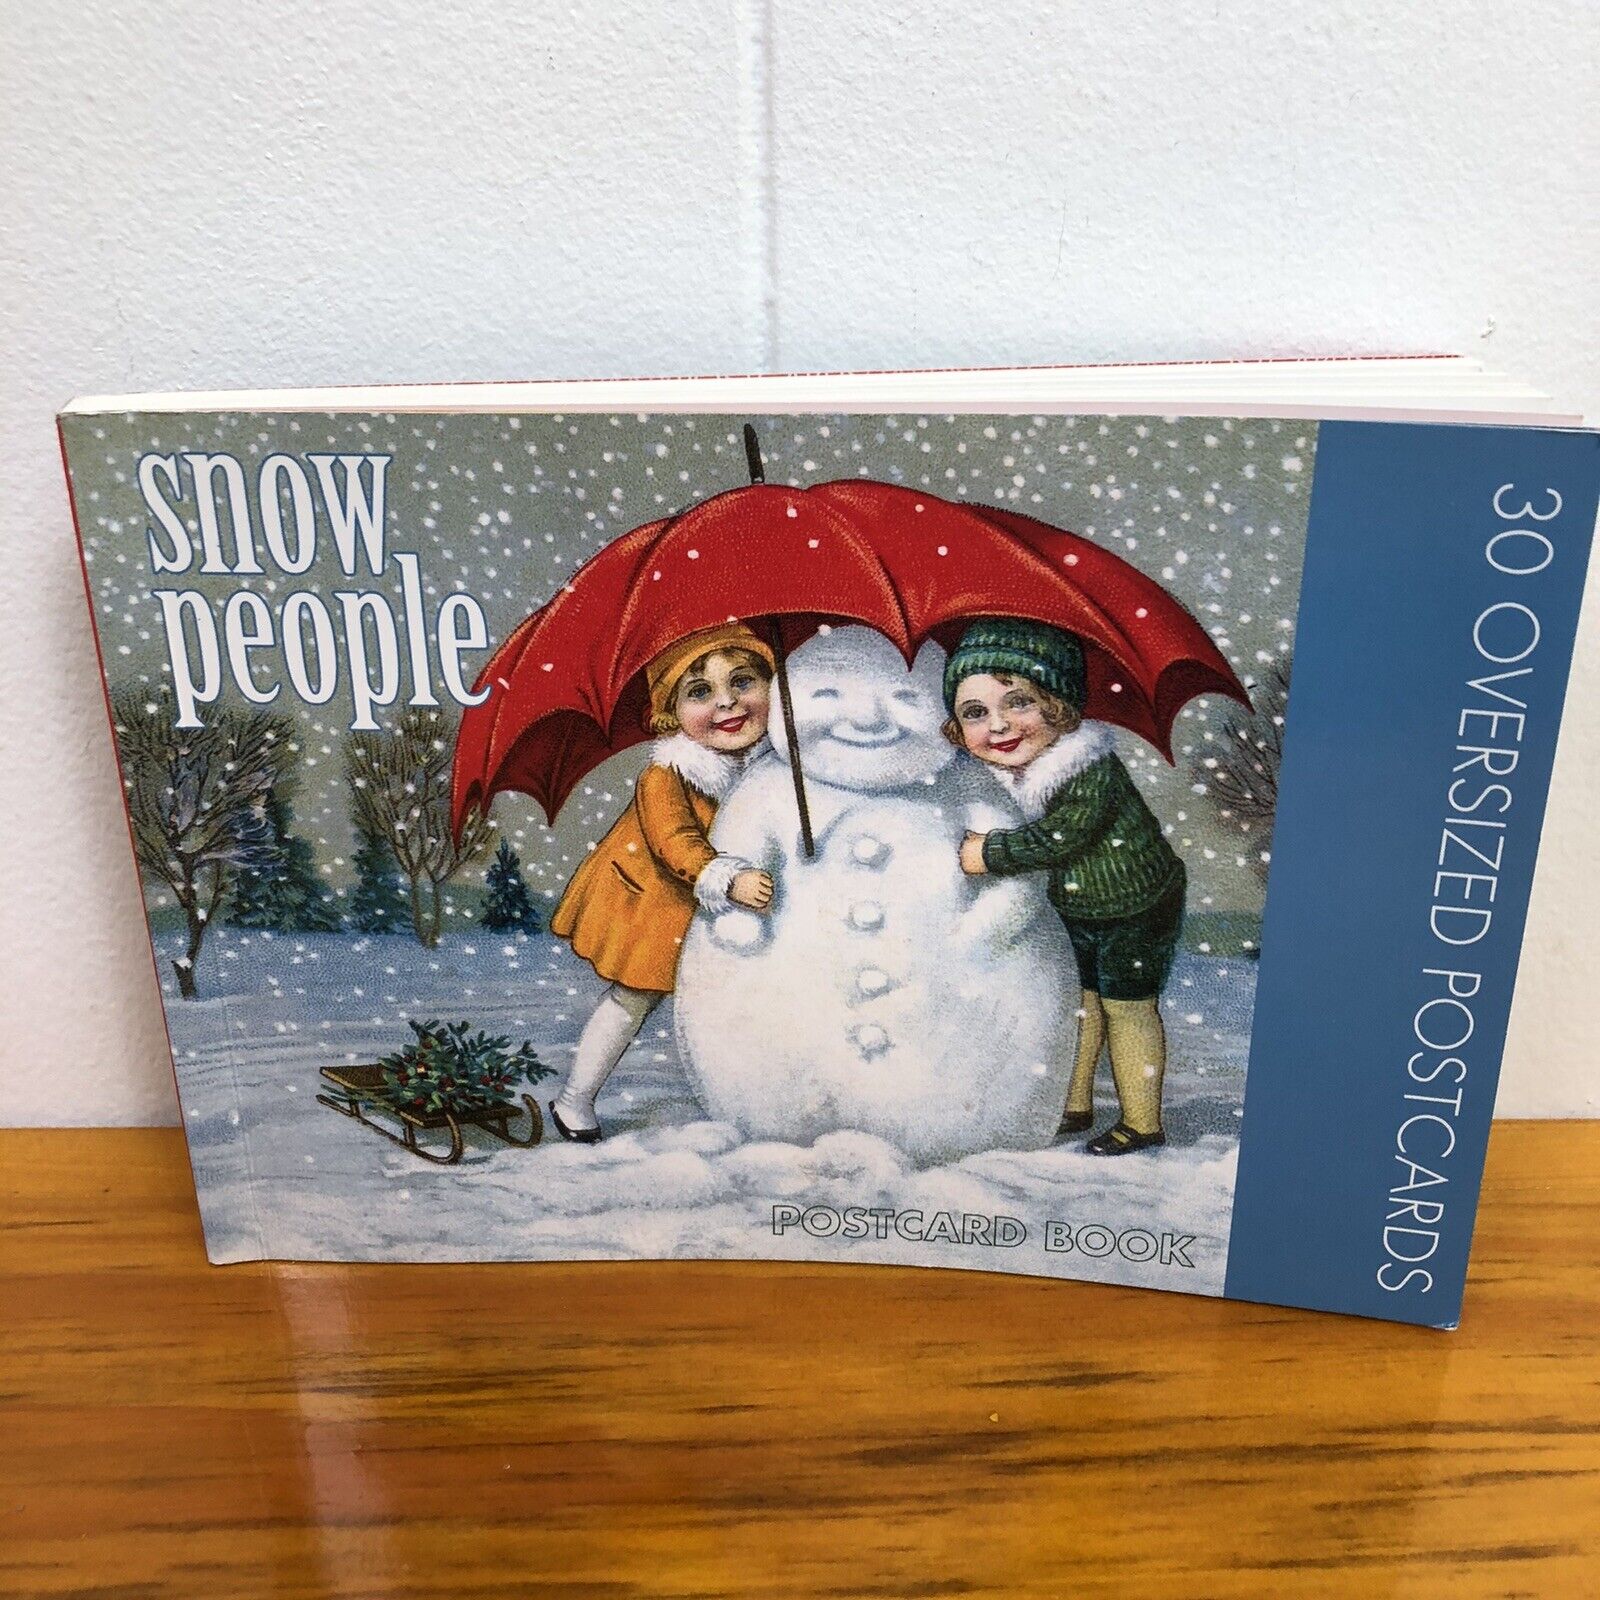 Vintage Postcard Book Snow People Art Set Of 30 By Darling & Company Seattle